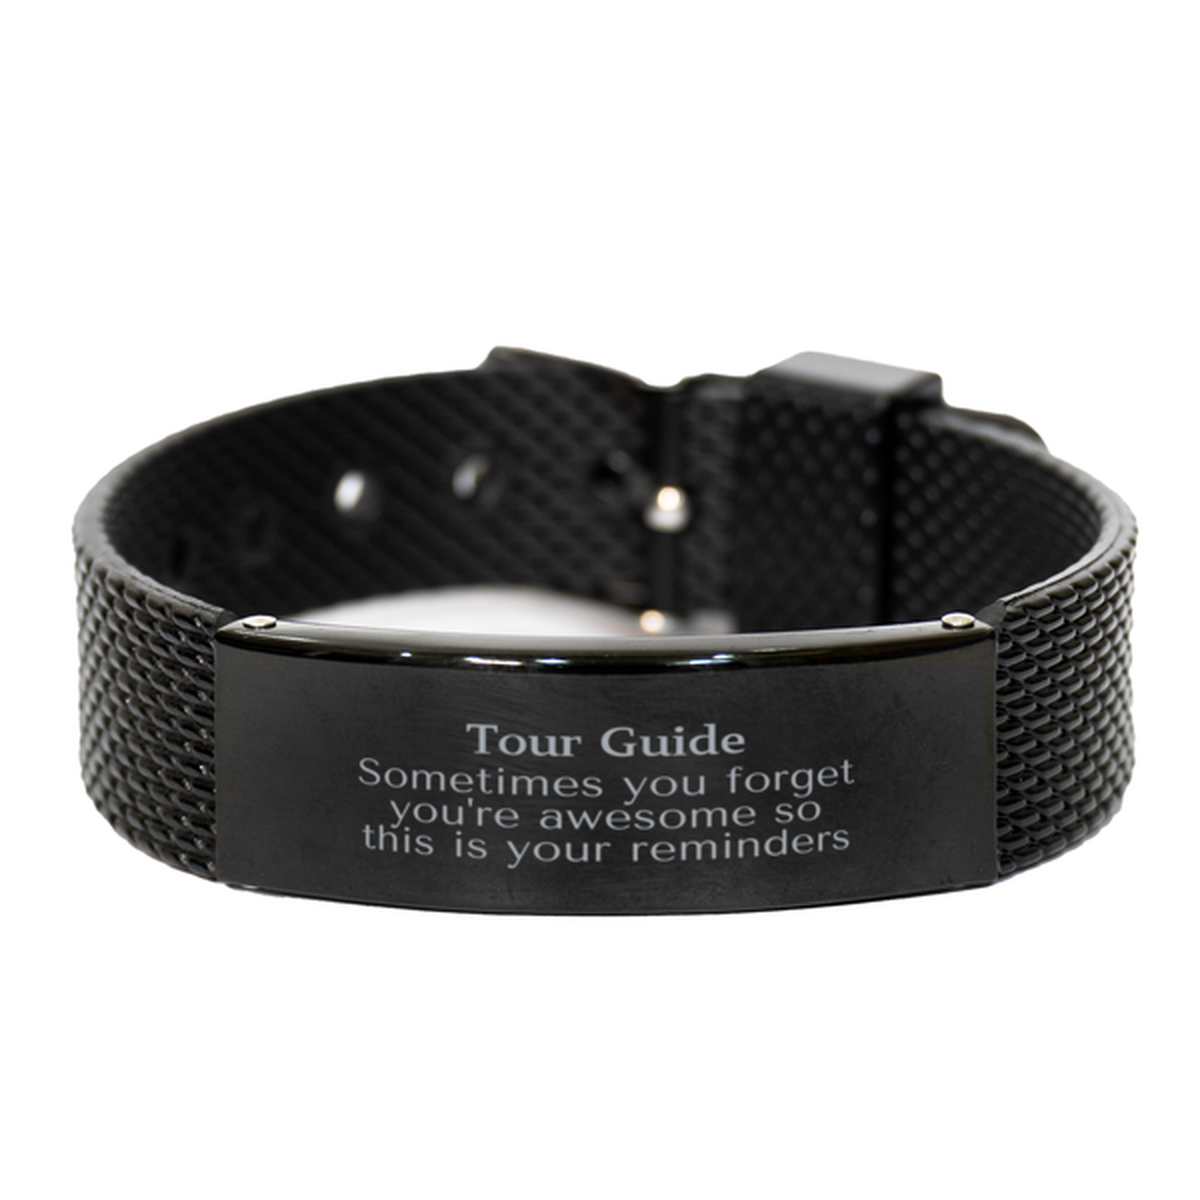 Sentimental Tour Guide Black Shark Mesh Bracelet, Tour Guide Sometimes you forget you're awesome so this is your reminders, Graduation Christmas Birthday Gifts for Tour Guide, Men, Women, Coworkers